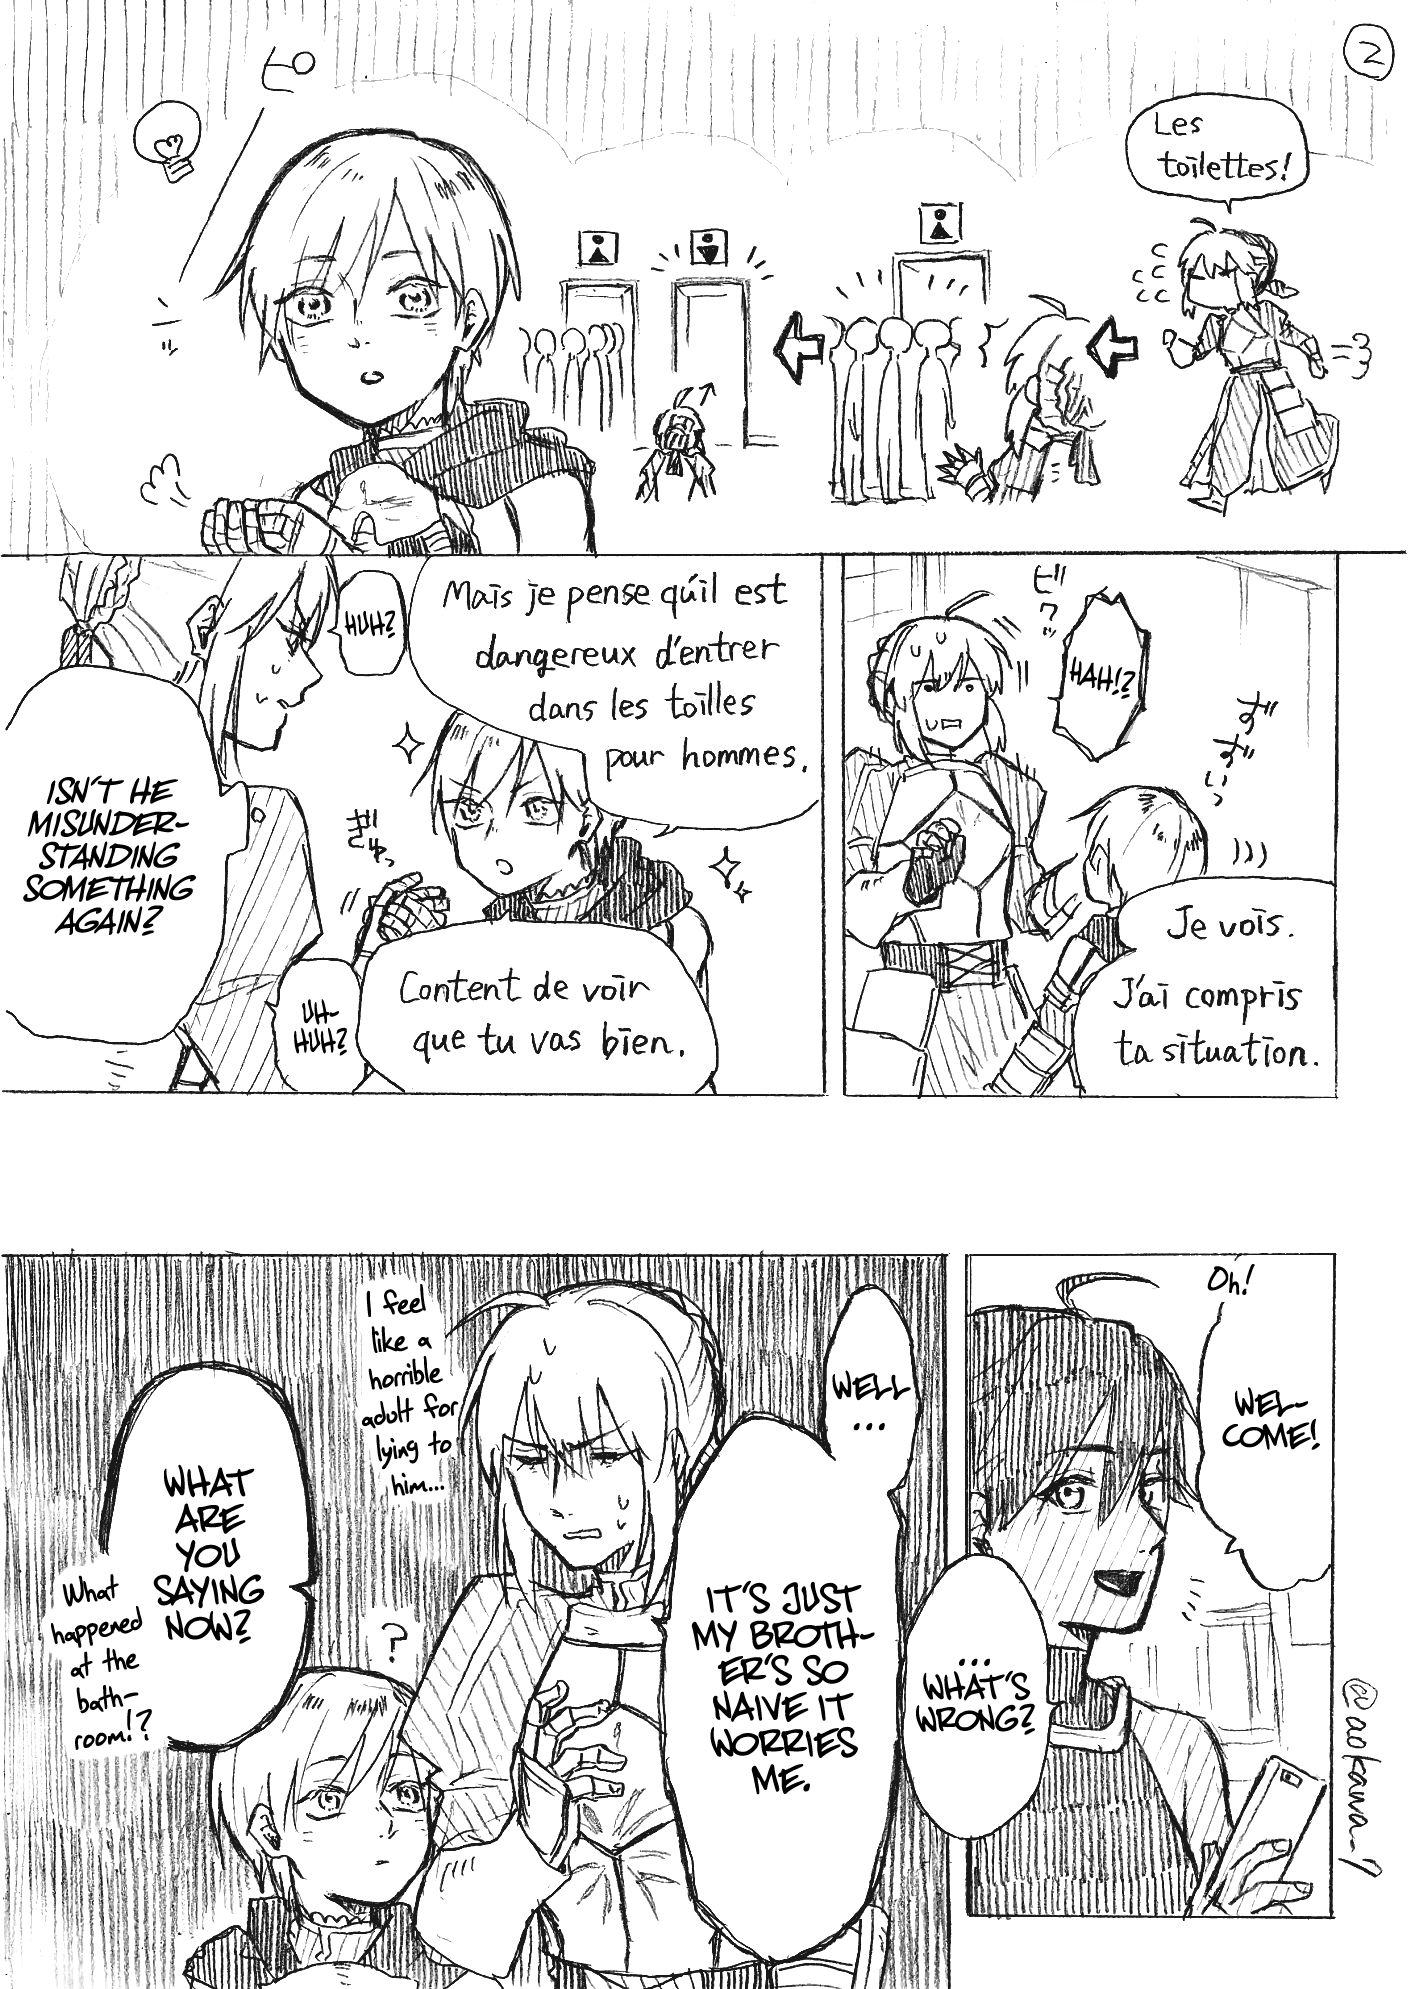 The Manga Where a Crossdressing Cosplayer Gets a Brother Chapter 3.1: Part 7